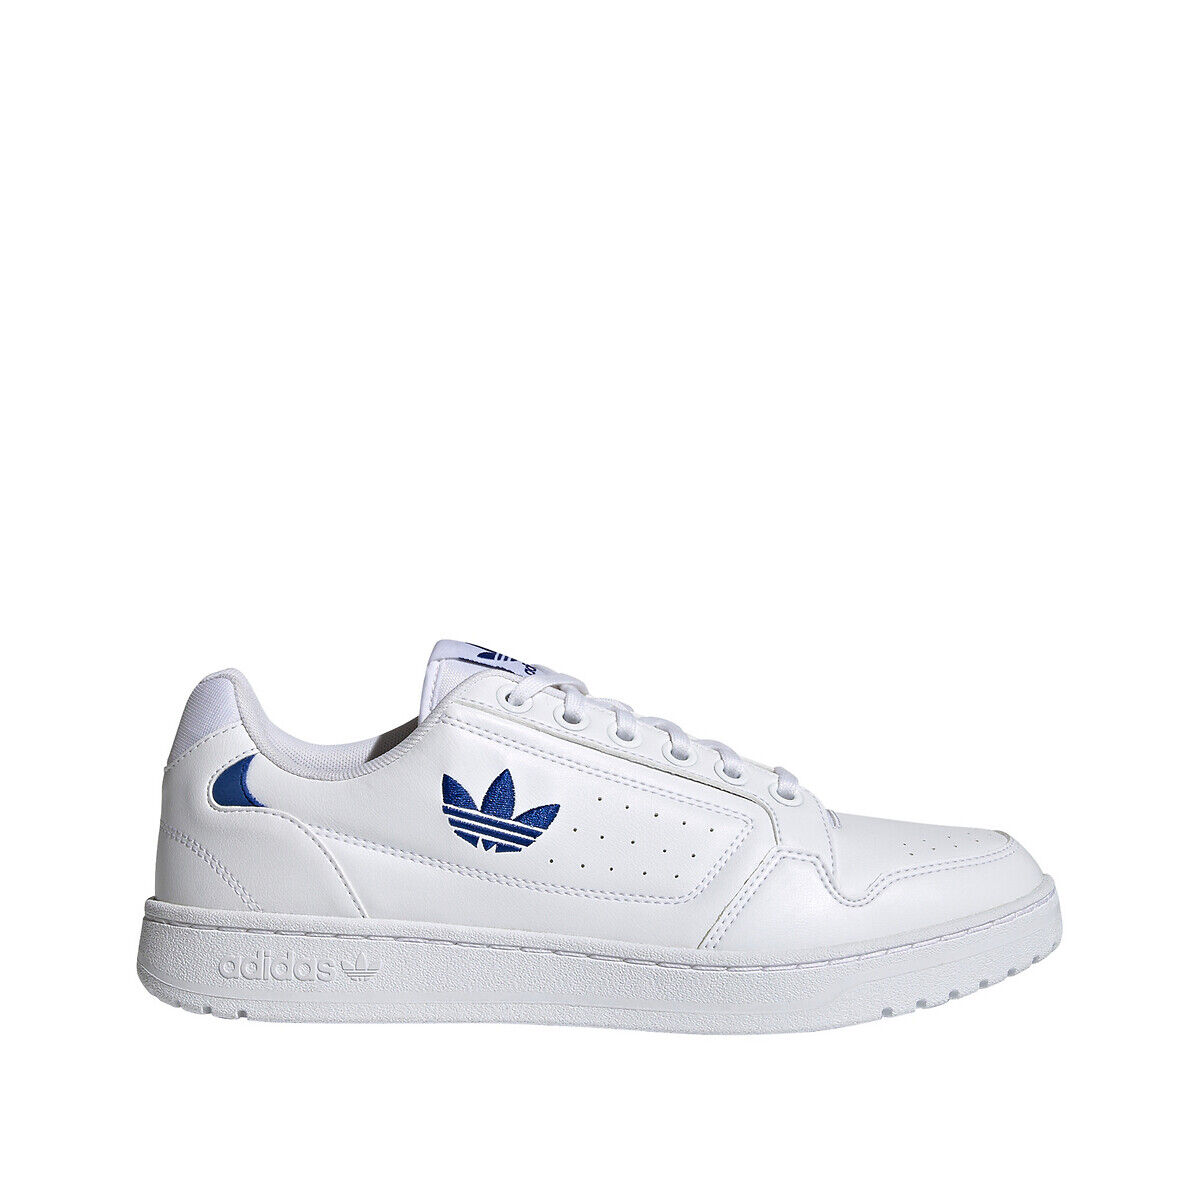 Adidas Sneakers Ny 92 WEISS